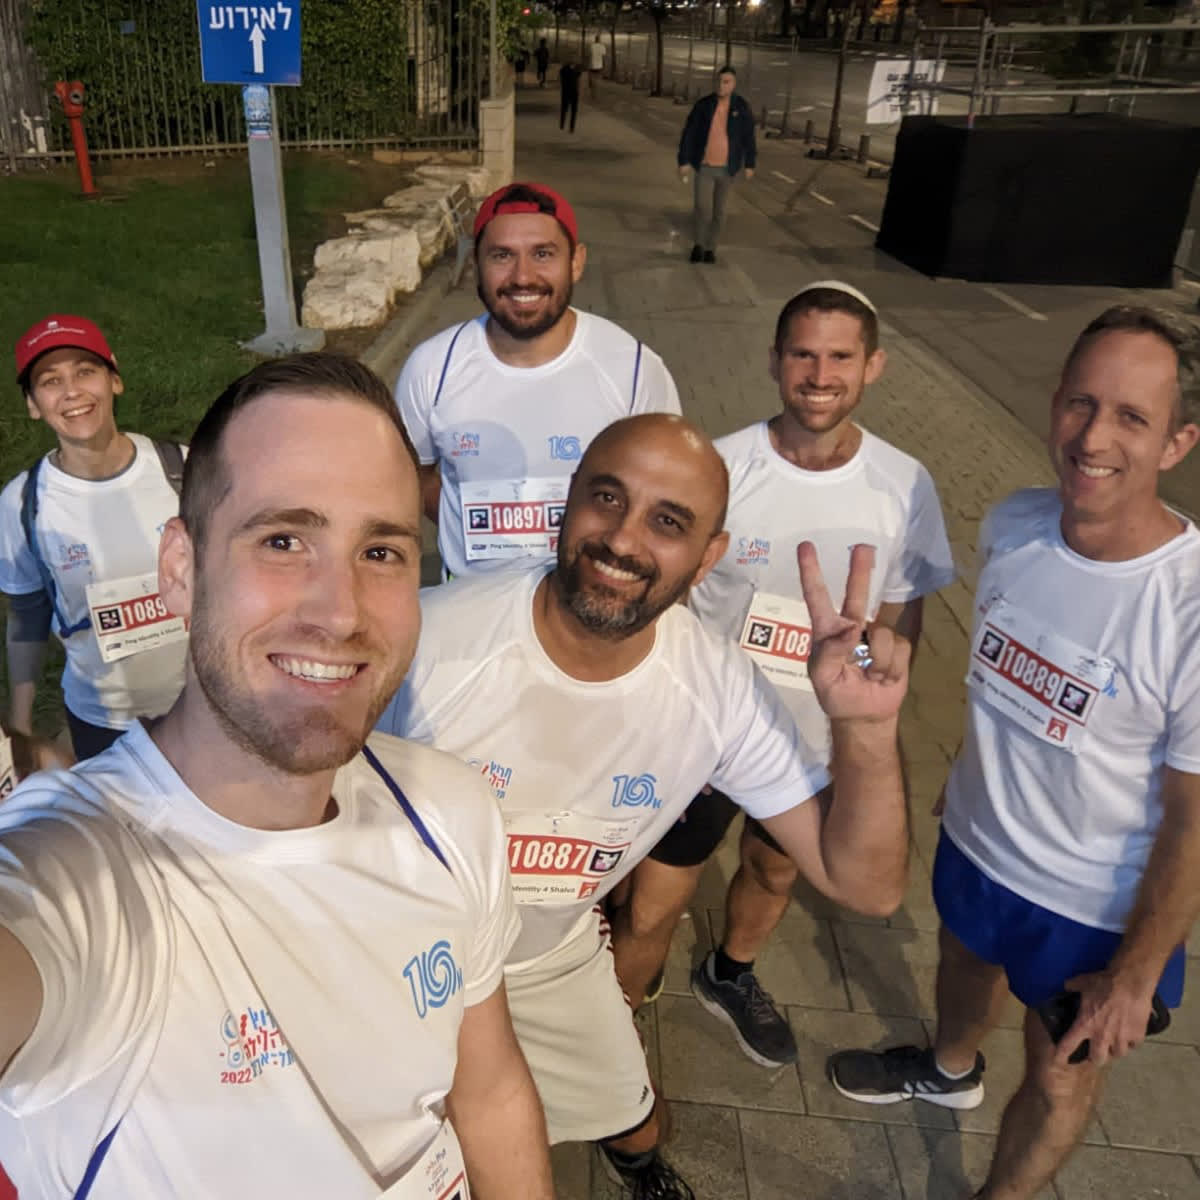 A photo of a group of Ping Identity employees posing outdoors after running in a fundraising 10K night run in Israel.